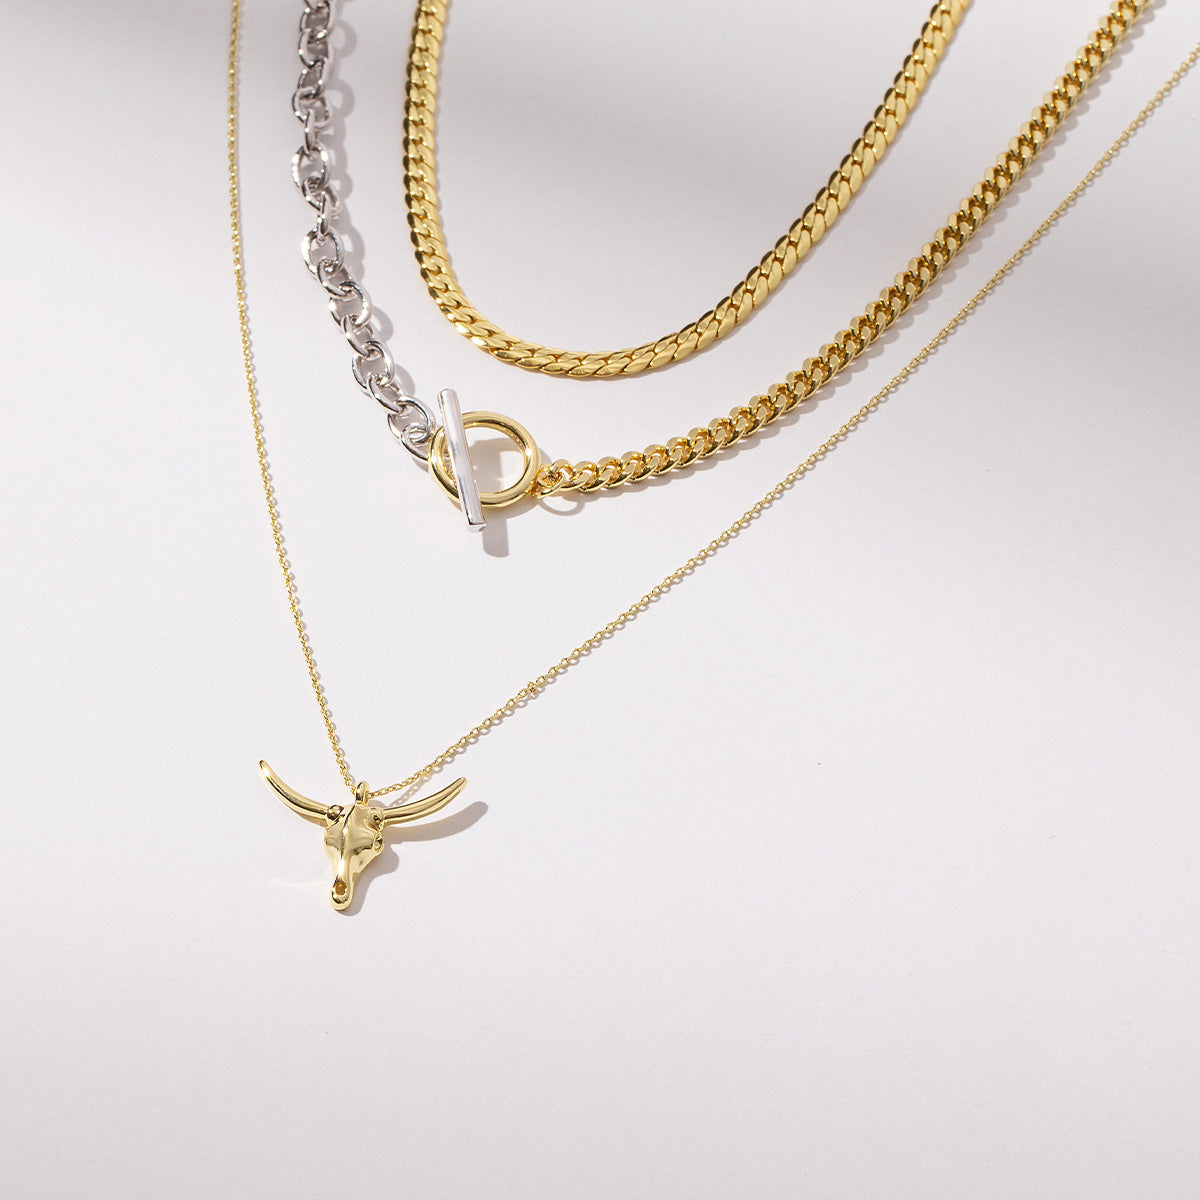 Layered up Necklace Set | Gold | Product Image | Uncommon James